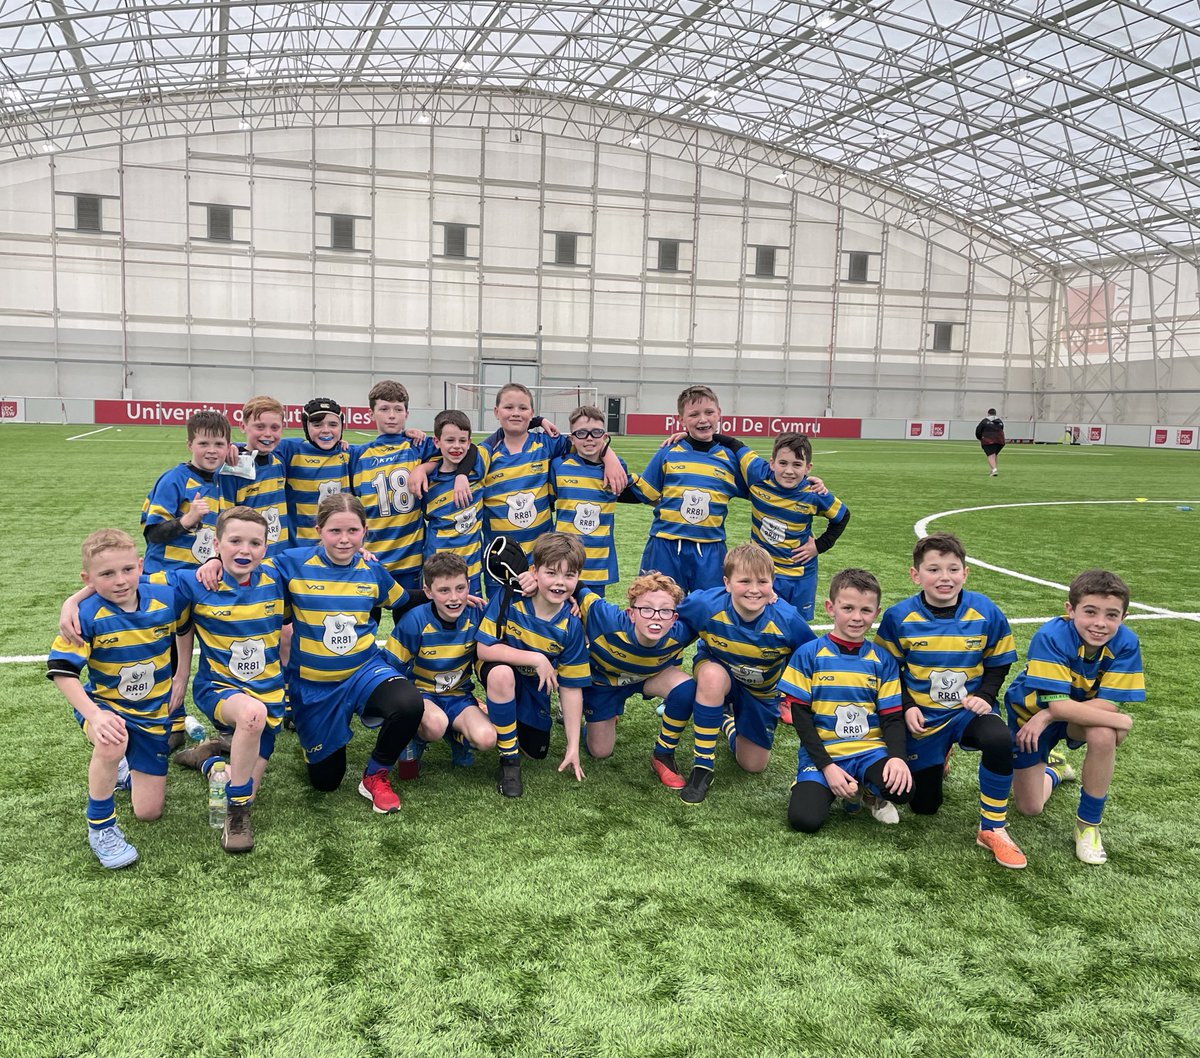 Yesterday, our rugby squad got another chance to shine with some experiencing the thrill of rugby for the very first time. Well done to all players 🏉